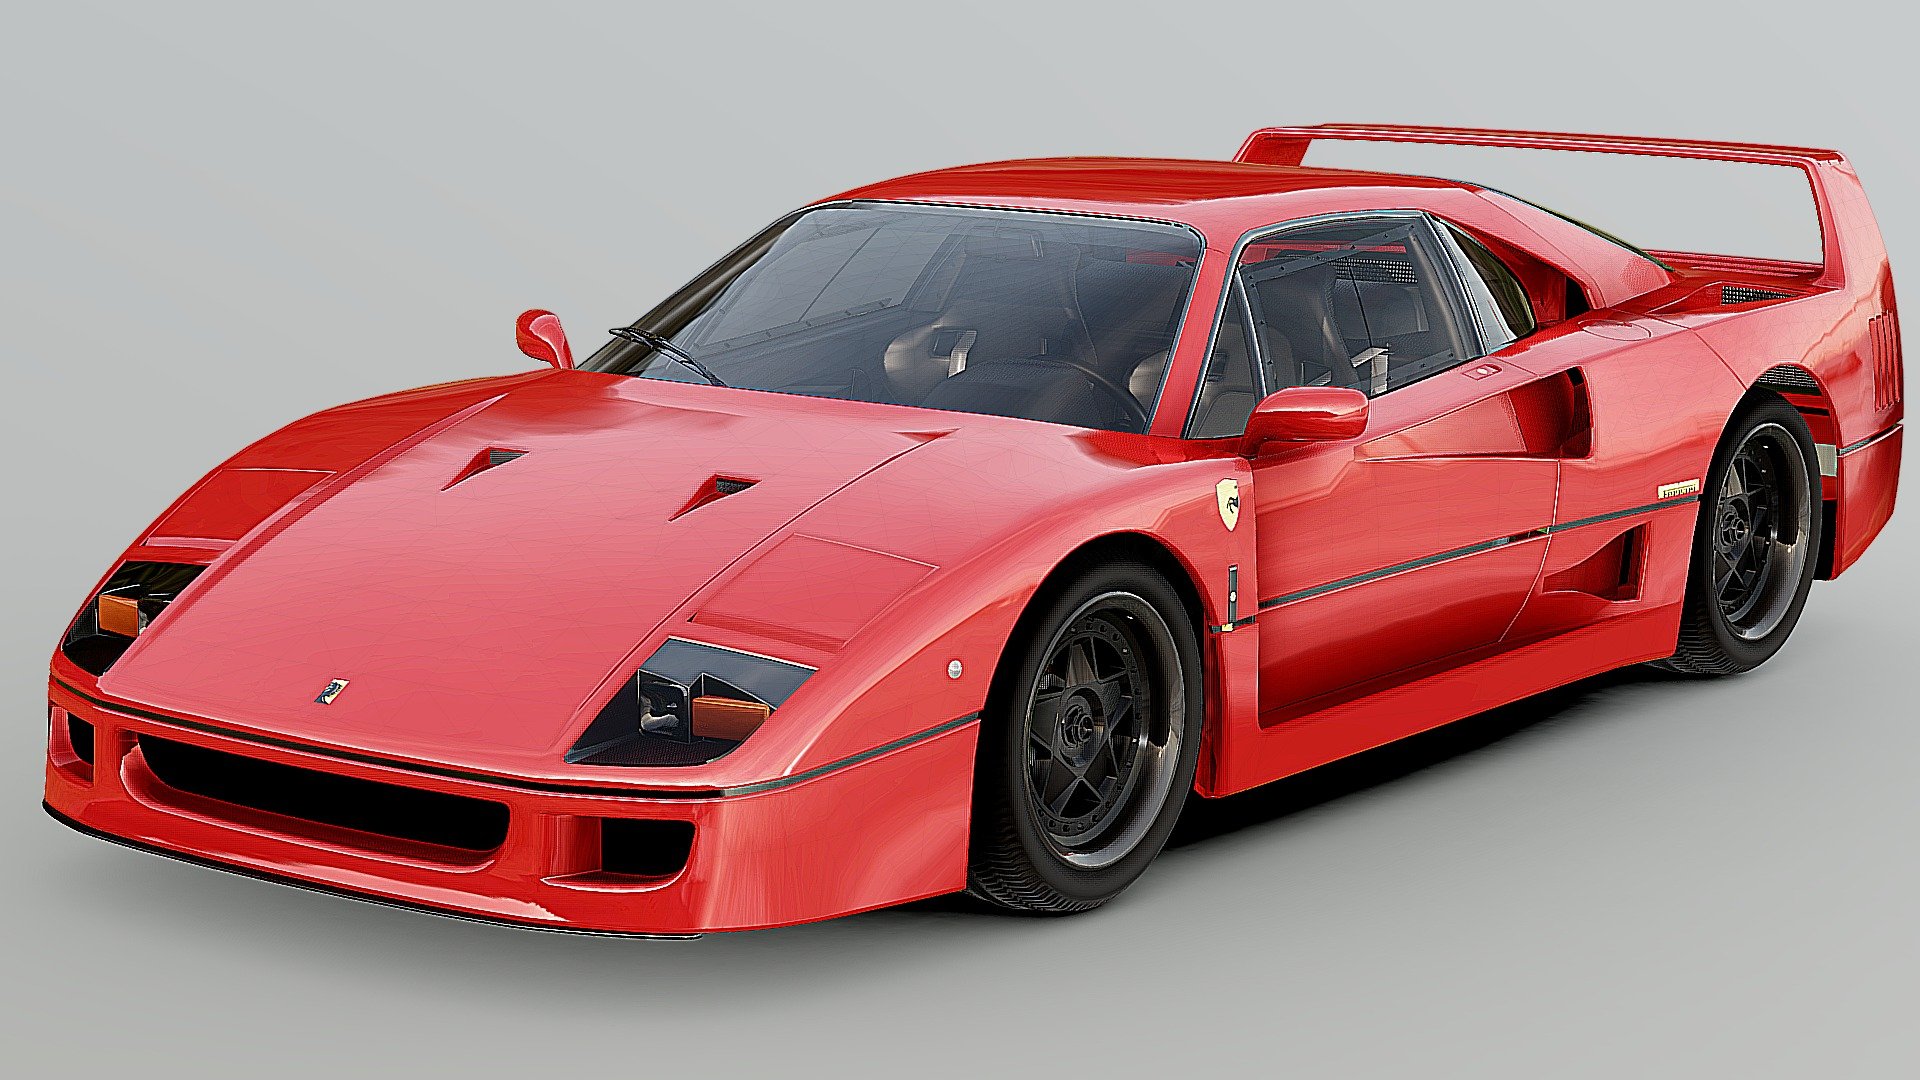 The Ferrari F40 (Type F120) is a mid-engine, rear-wheel drive sports car engineered by Nicola Materazzi with styling by Pininfarina. It was built from 1987 until 1992, with the LM and GTE race car versions continuing production until 1994 and 1996 respectively. As the successor to the 288 GTO (also engineered by Materazzi), it was designed to celebrate Ferrari's 40th anniversary and was the last Ferrari automobile personally approved by Enzo Ferrari. At the time it was Ferrari's fastest, most powerful, and most expensive car for sale 3d model